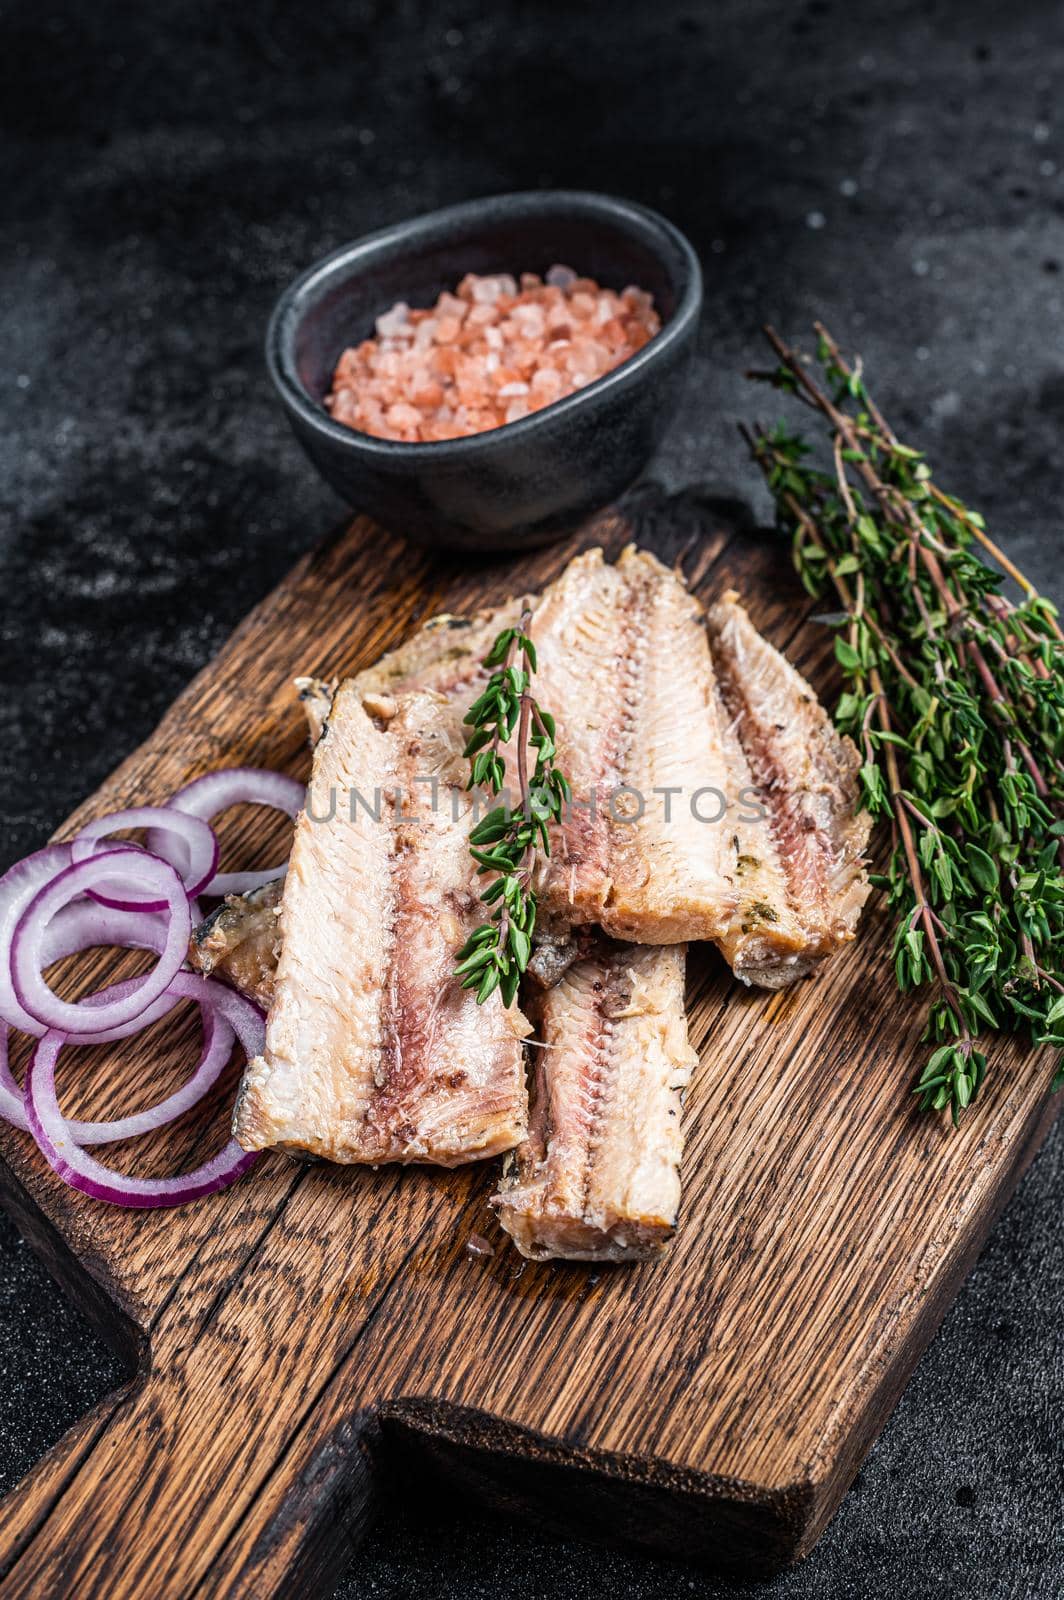 Sardine fish fillet in olive oil on wooden board. Black background. Top view by Composter